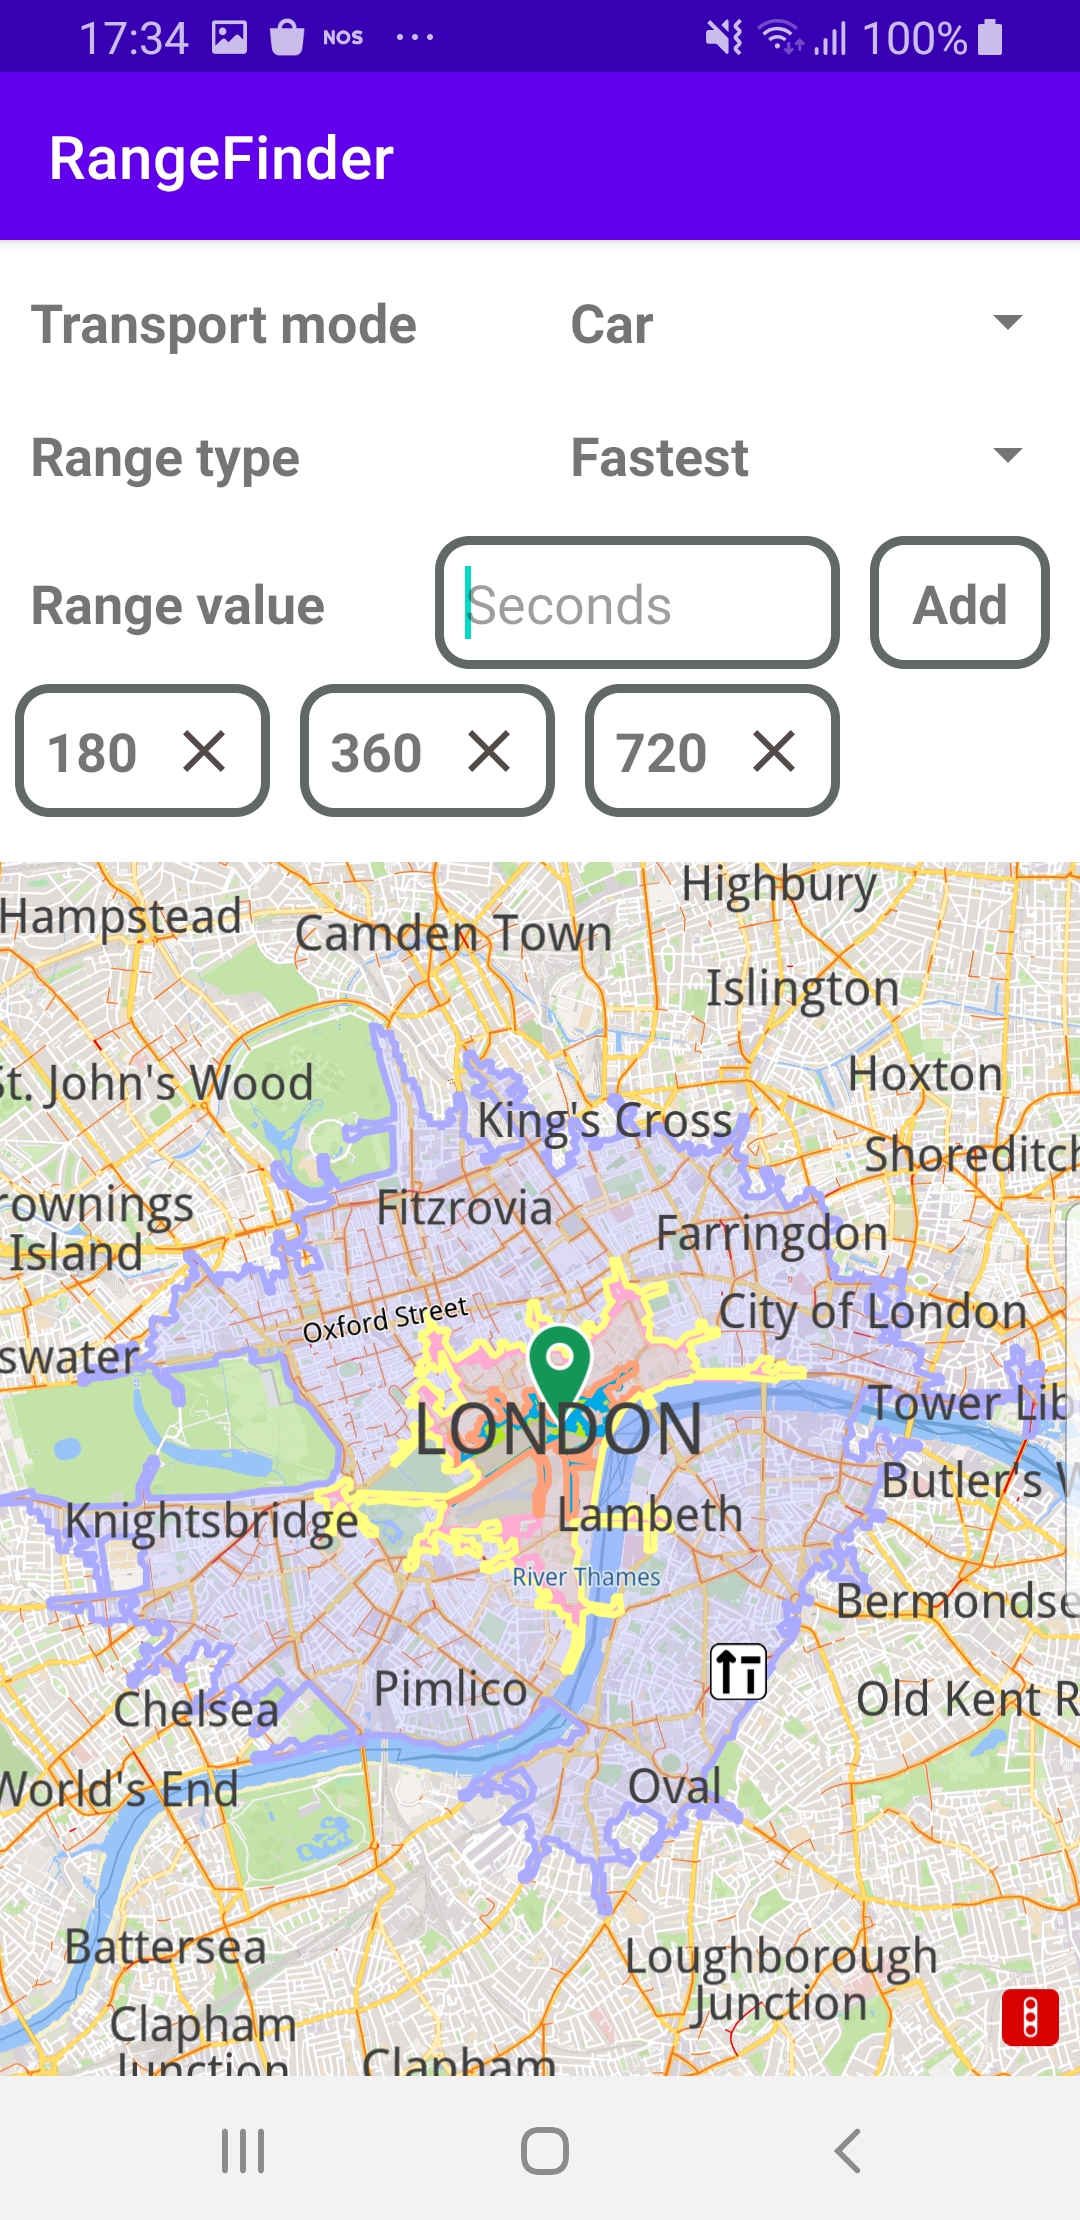 Range finder example Android screenshot